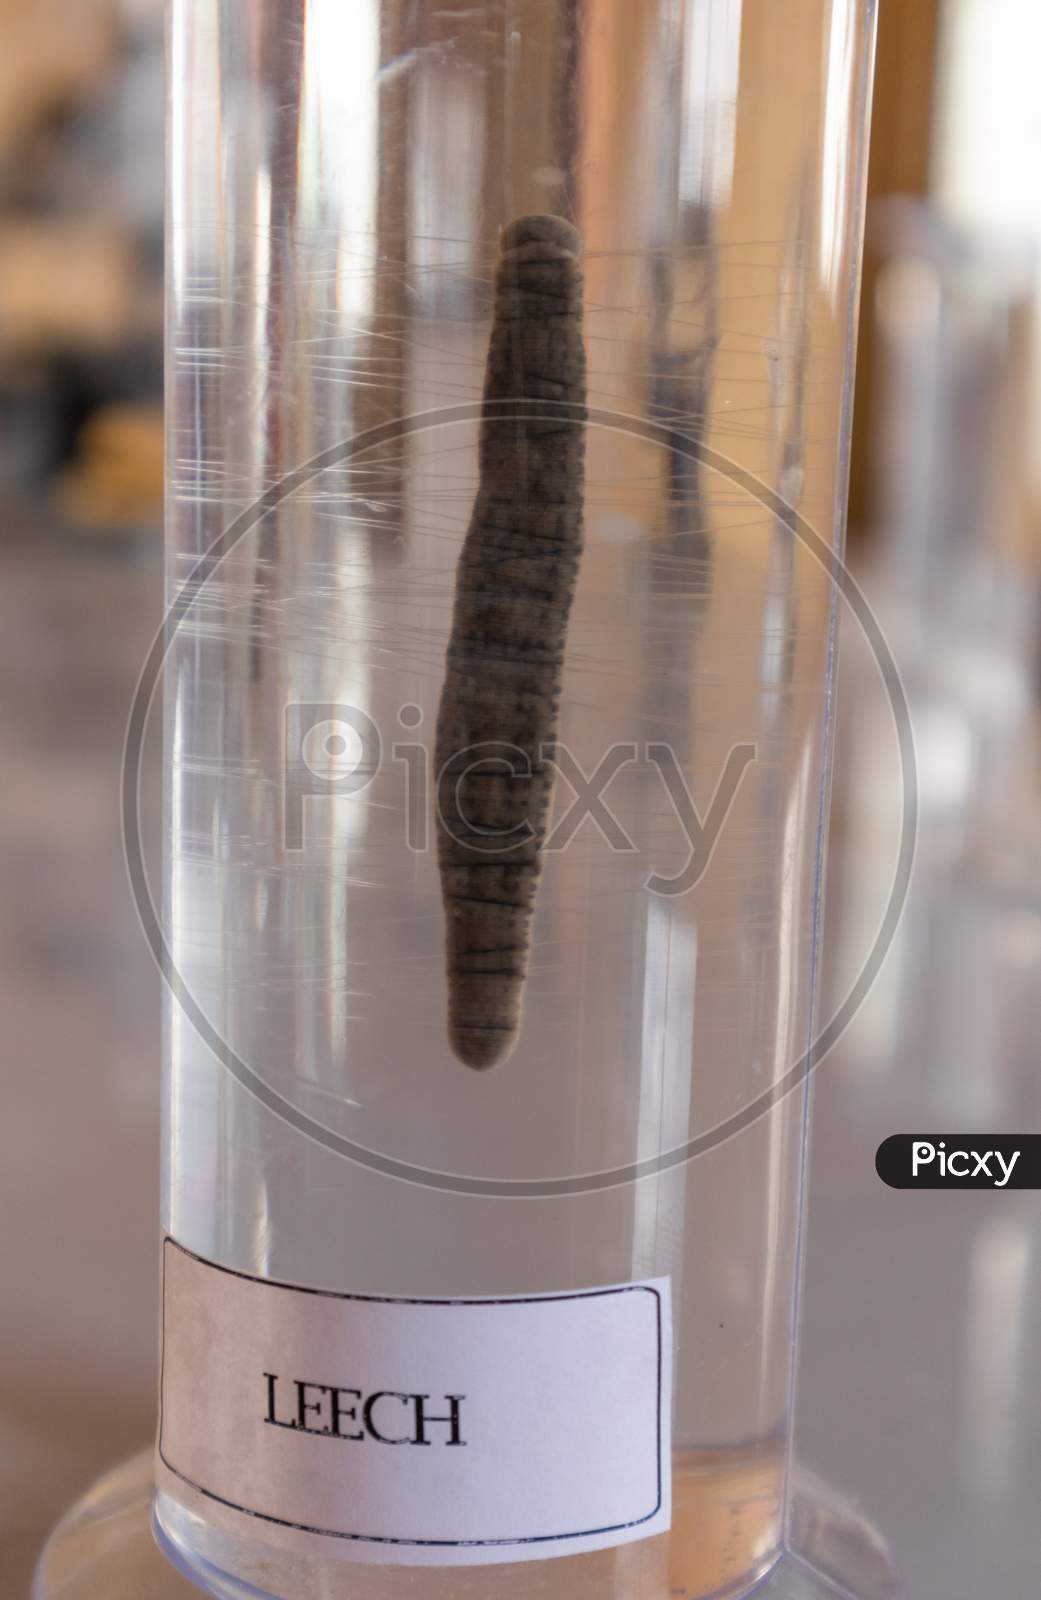 Leech In Lab Glassware At Science Laboratory In College